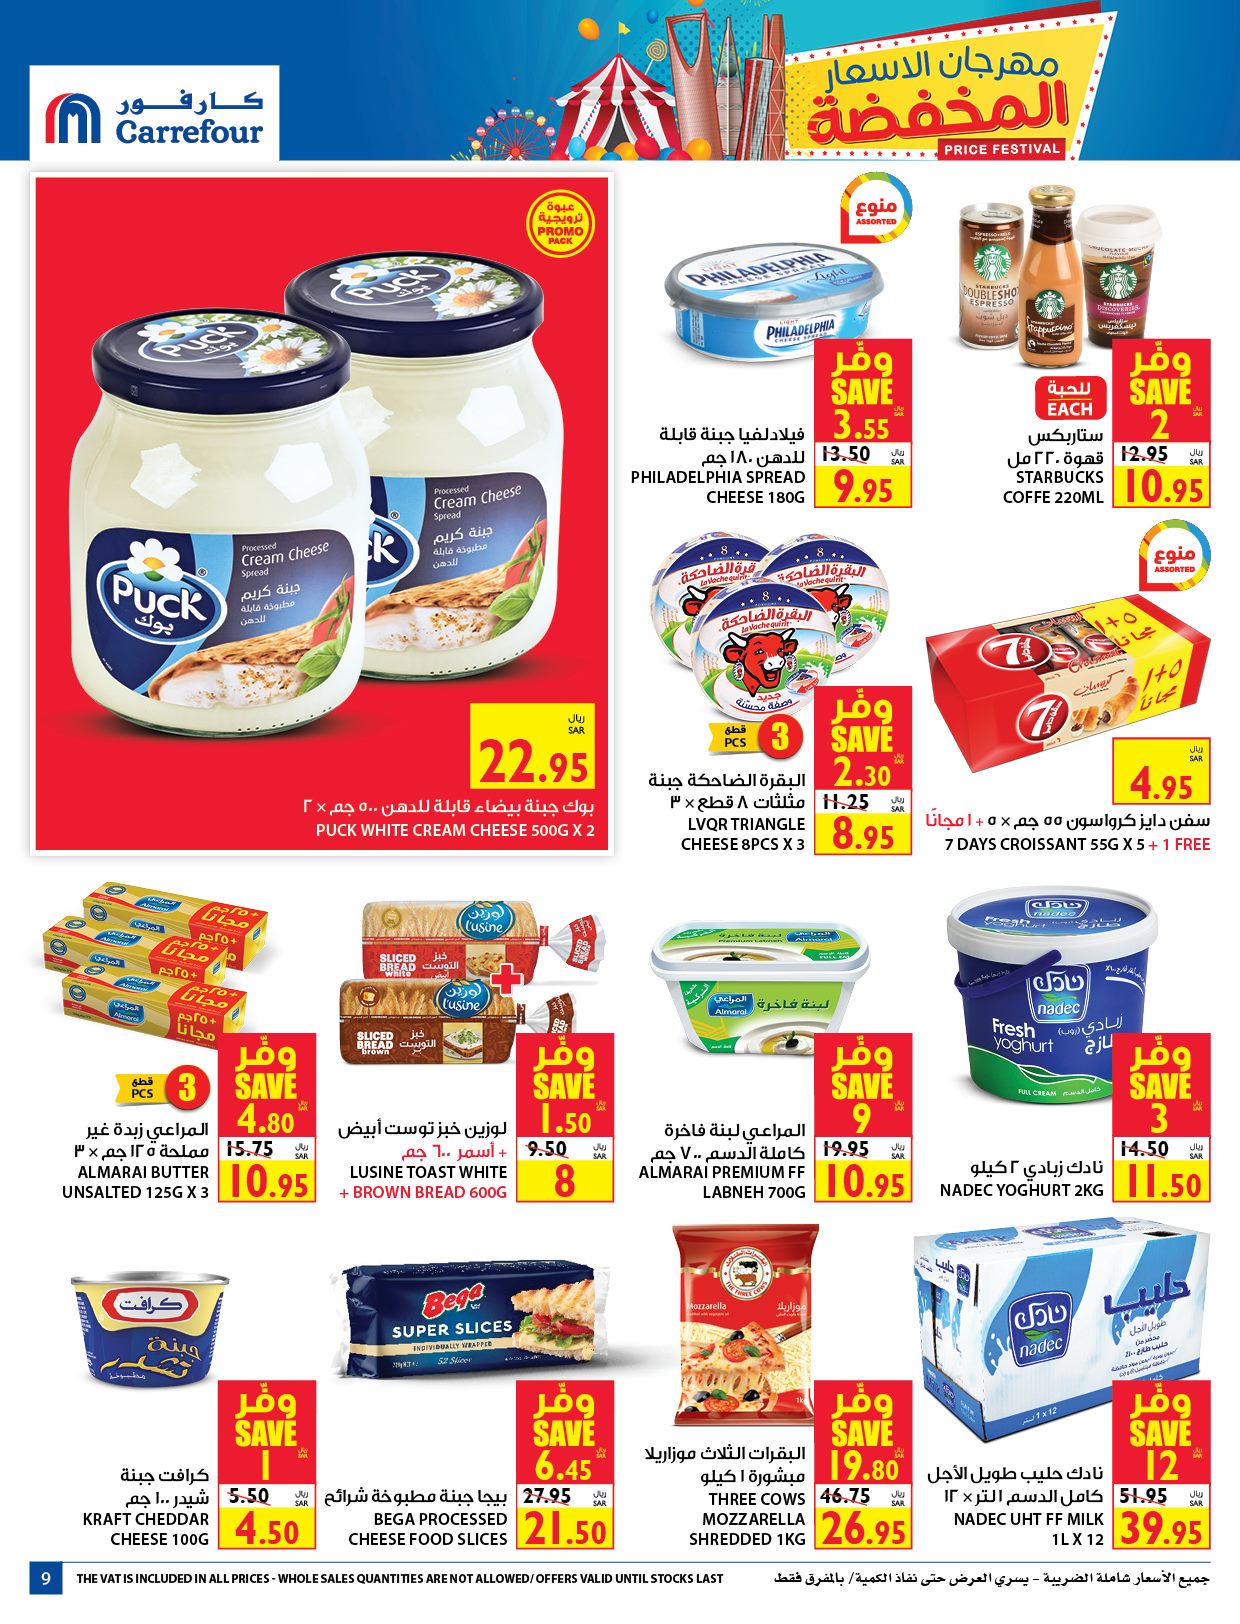 Carrefour Festival Offers from 12/8 till 25/8 | Carrefour KSA 10